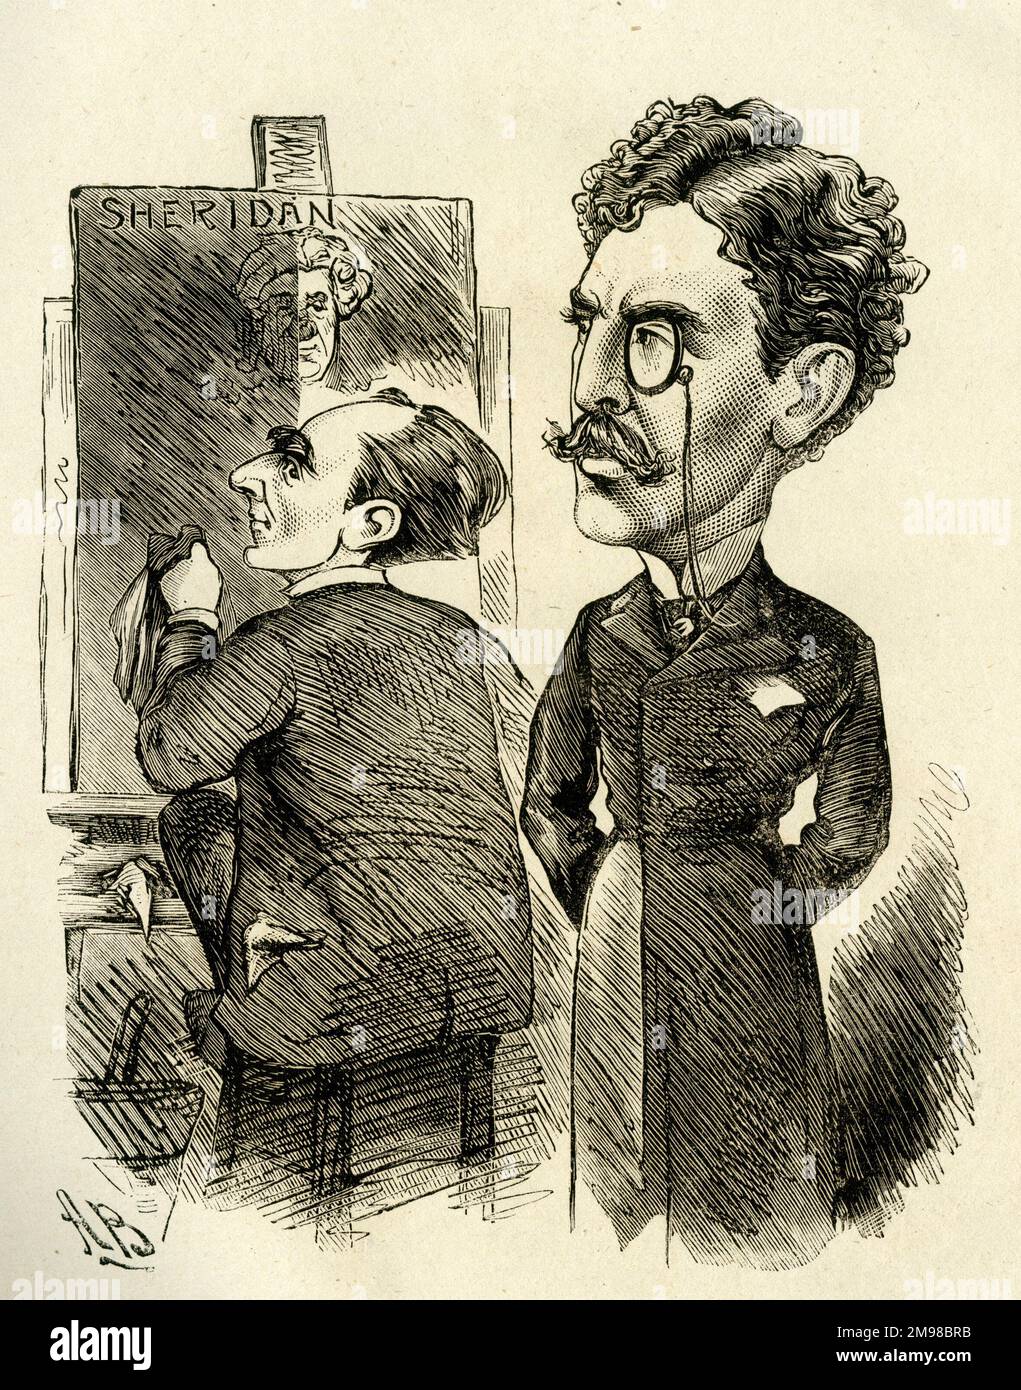 Cartoon, Sir Arthur Wing Pinero (1855-1934), English actor, playwright and stage director, and Sir Squire Bancroft (1841-1926), English actor-manager.  Old masters cleaned or restored on the shortest notice. A comment on reviving old plays. Stock Photo